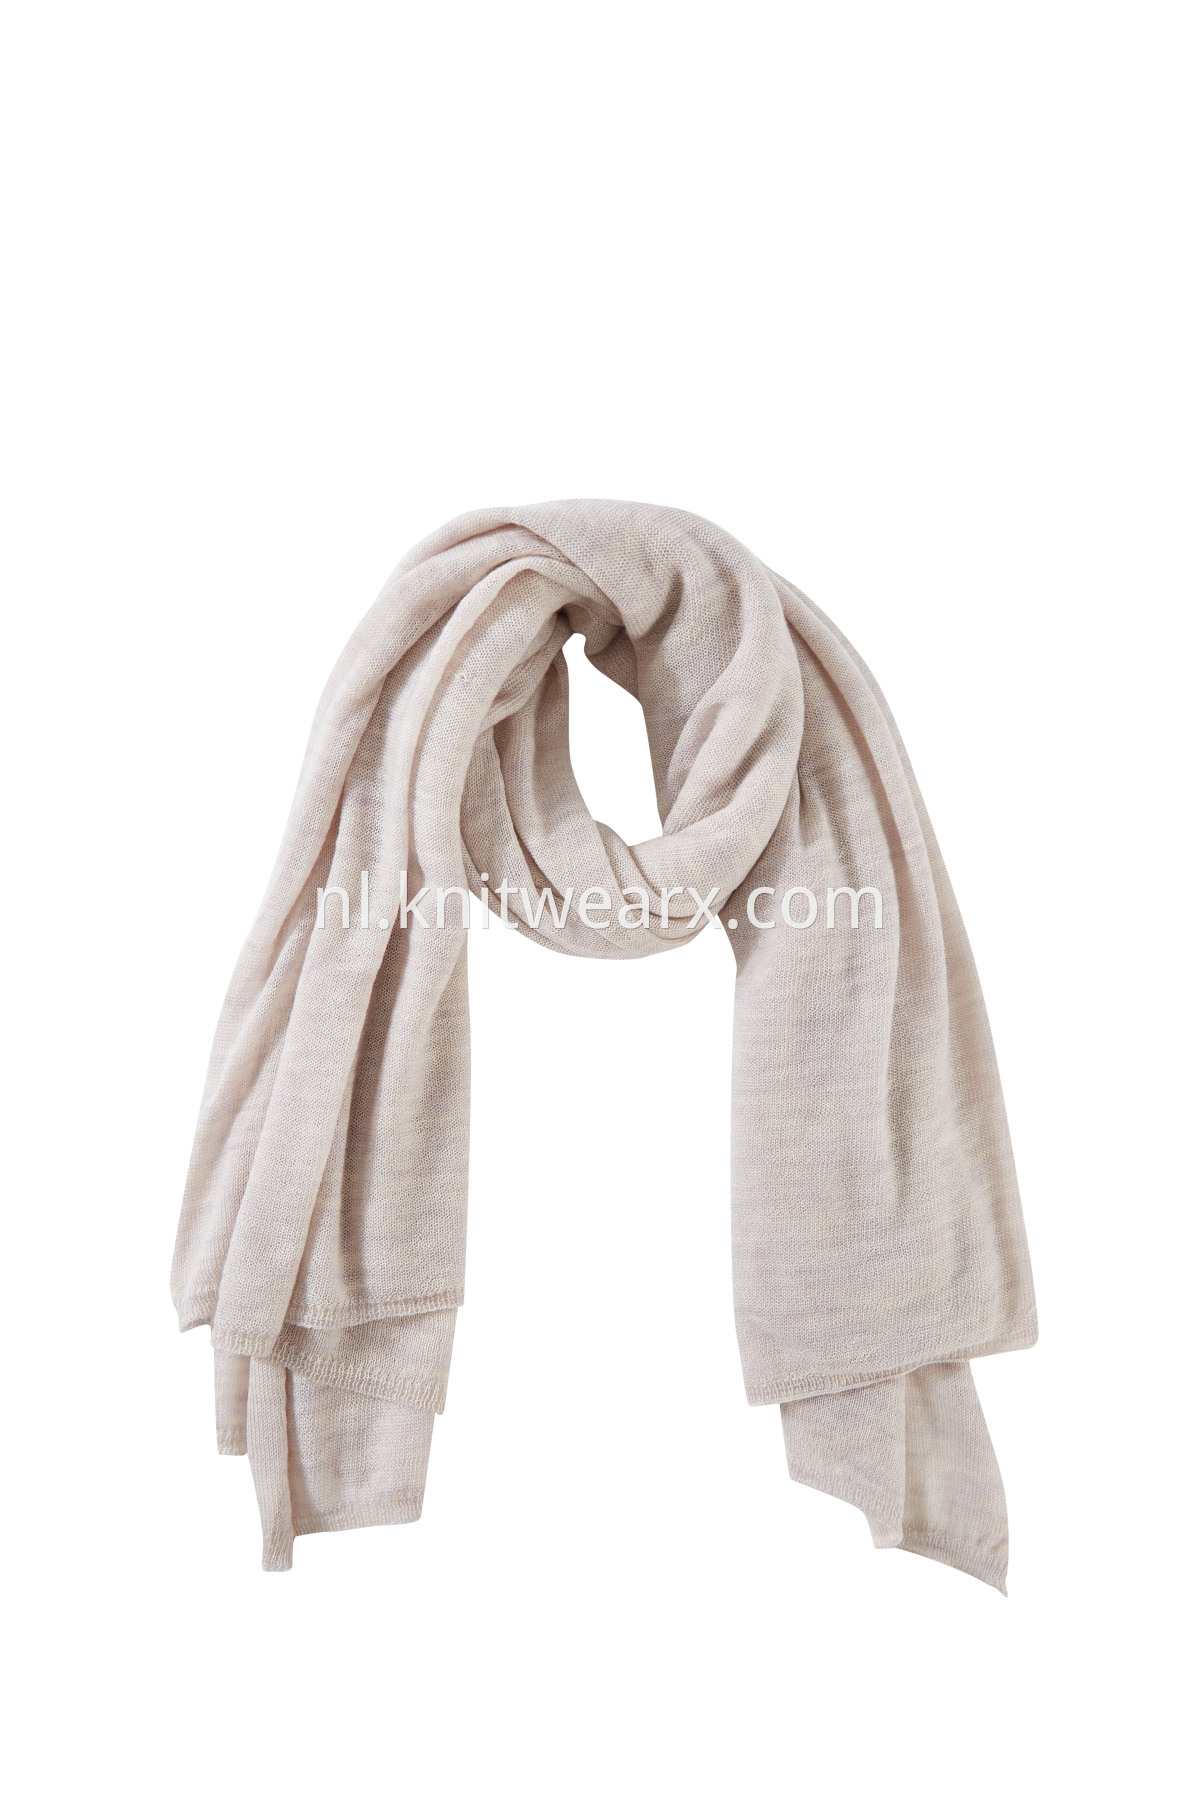 Women's Accessories First Essential Knit Cashmere Wool Scarf